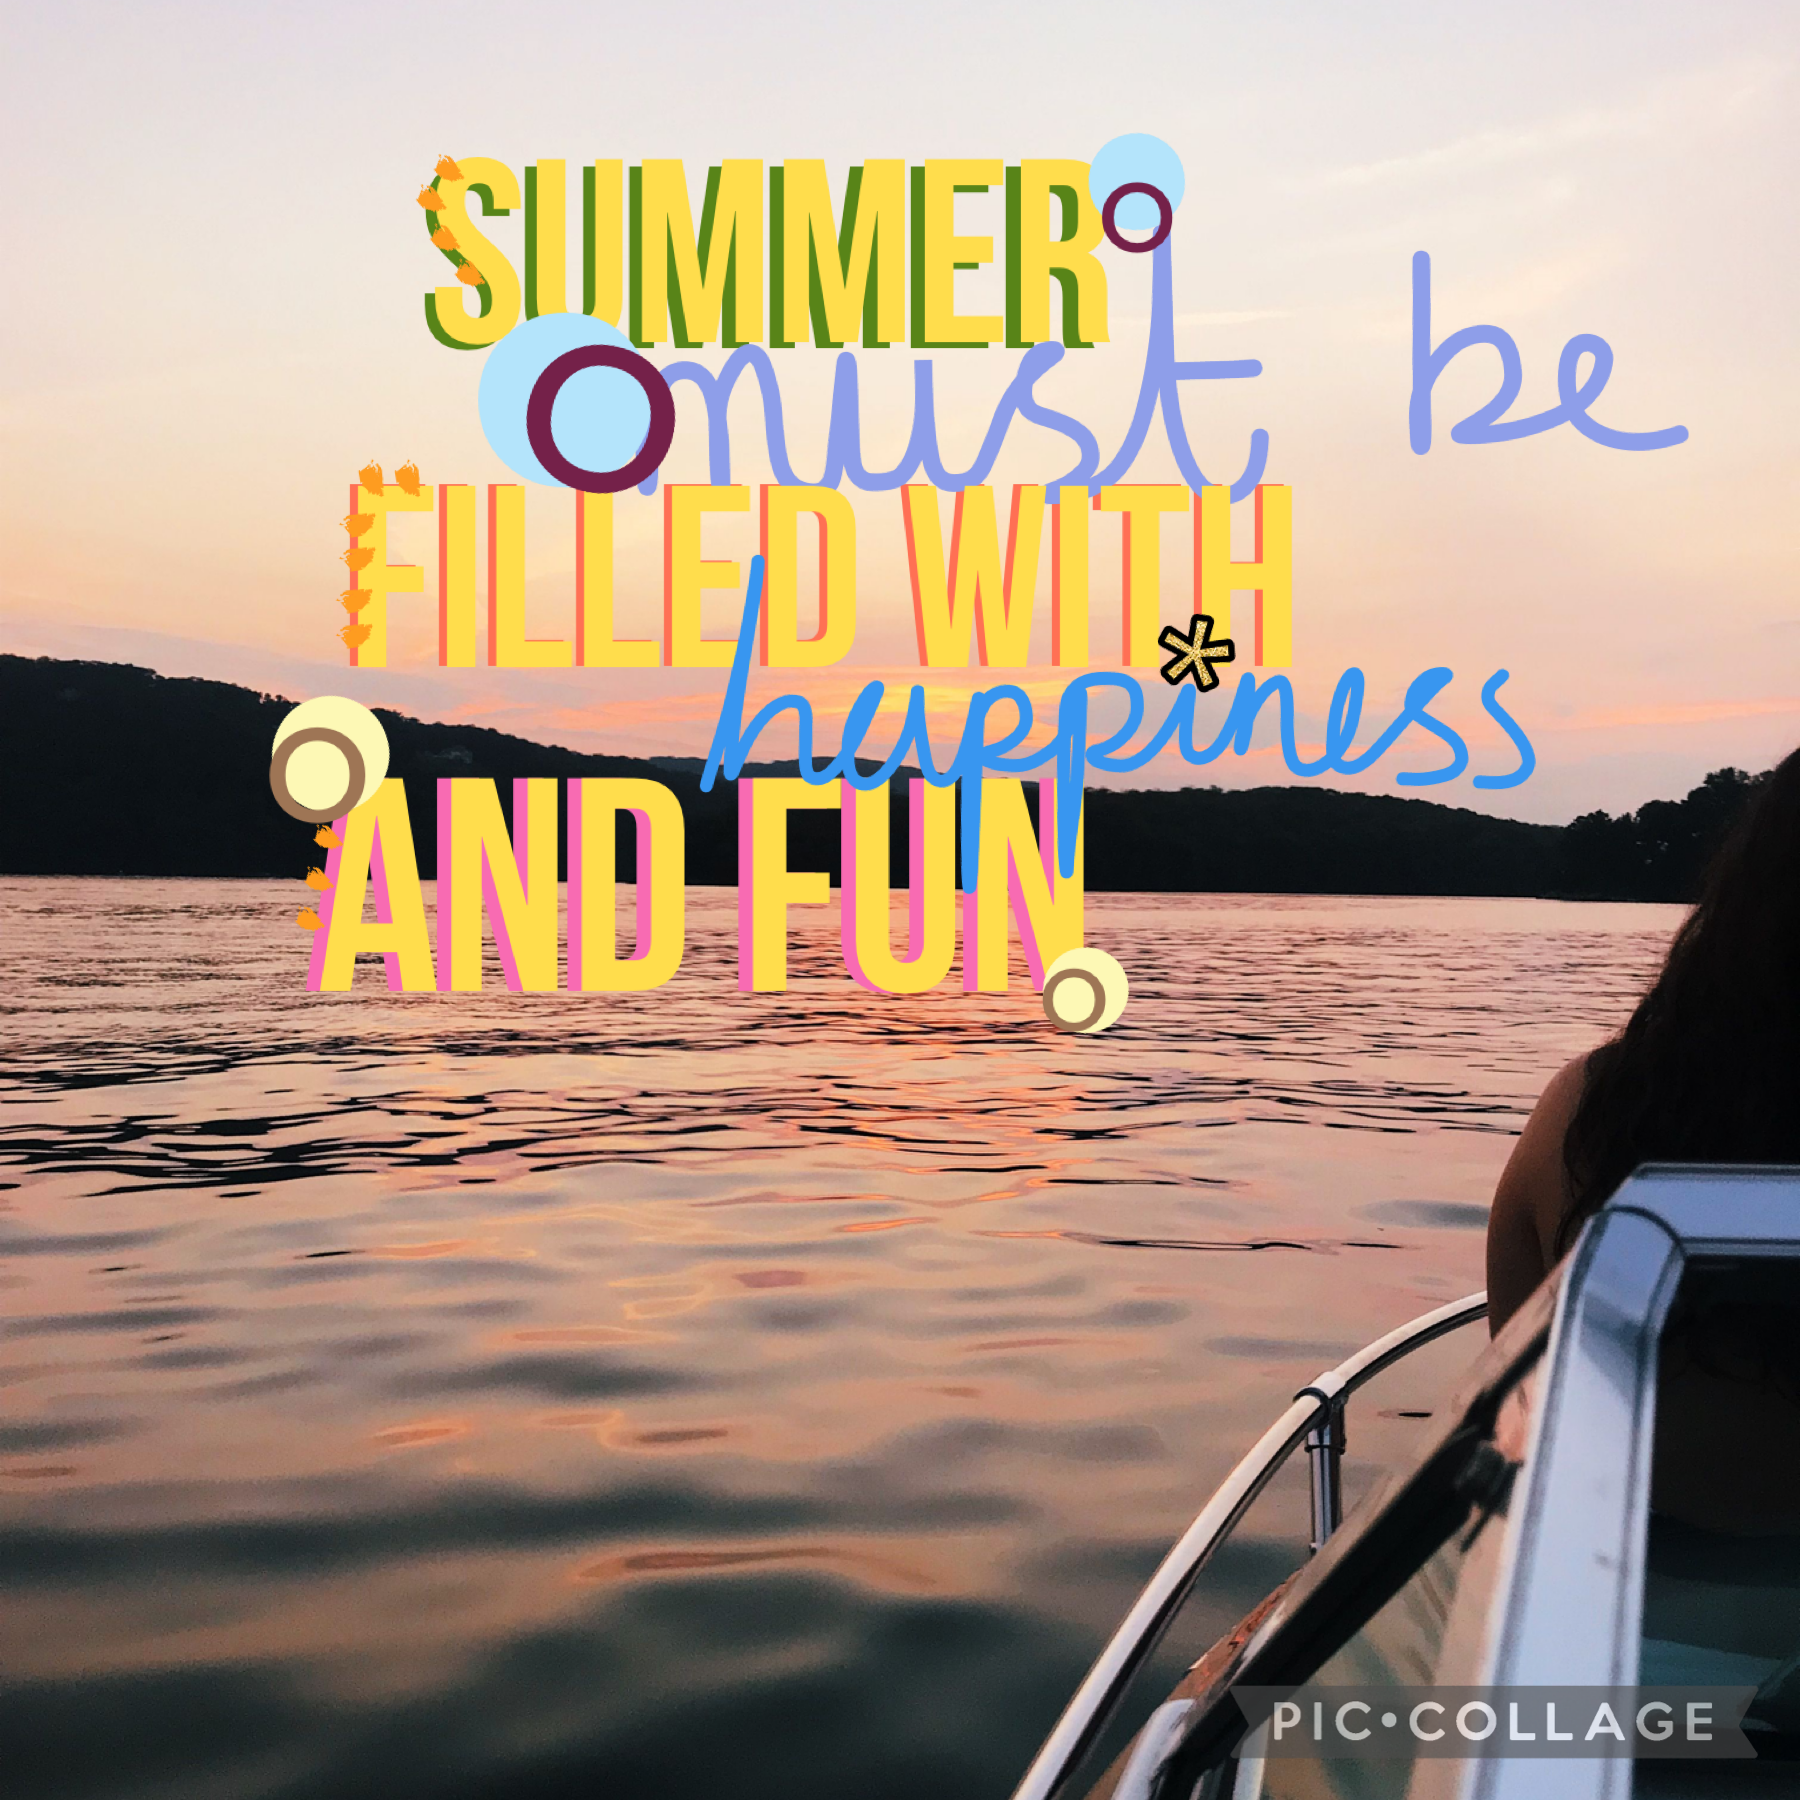 🩴Tap here for it to be summer time!🩴
🩴I thought it would be nice to start with summer now!🩴
My birthday 🎂 is like in 3/4 days!!🩴yay
🩴Hope you like this quote by me!🩴
🩴6.6.2022🩴